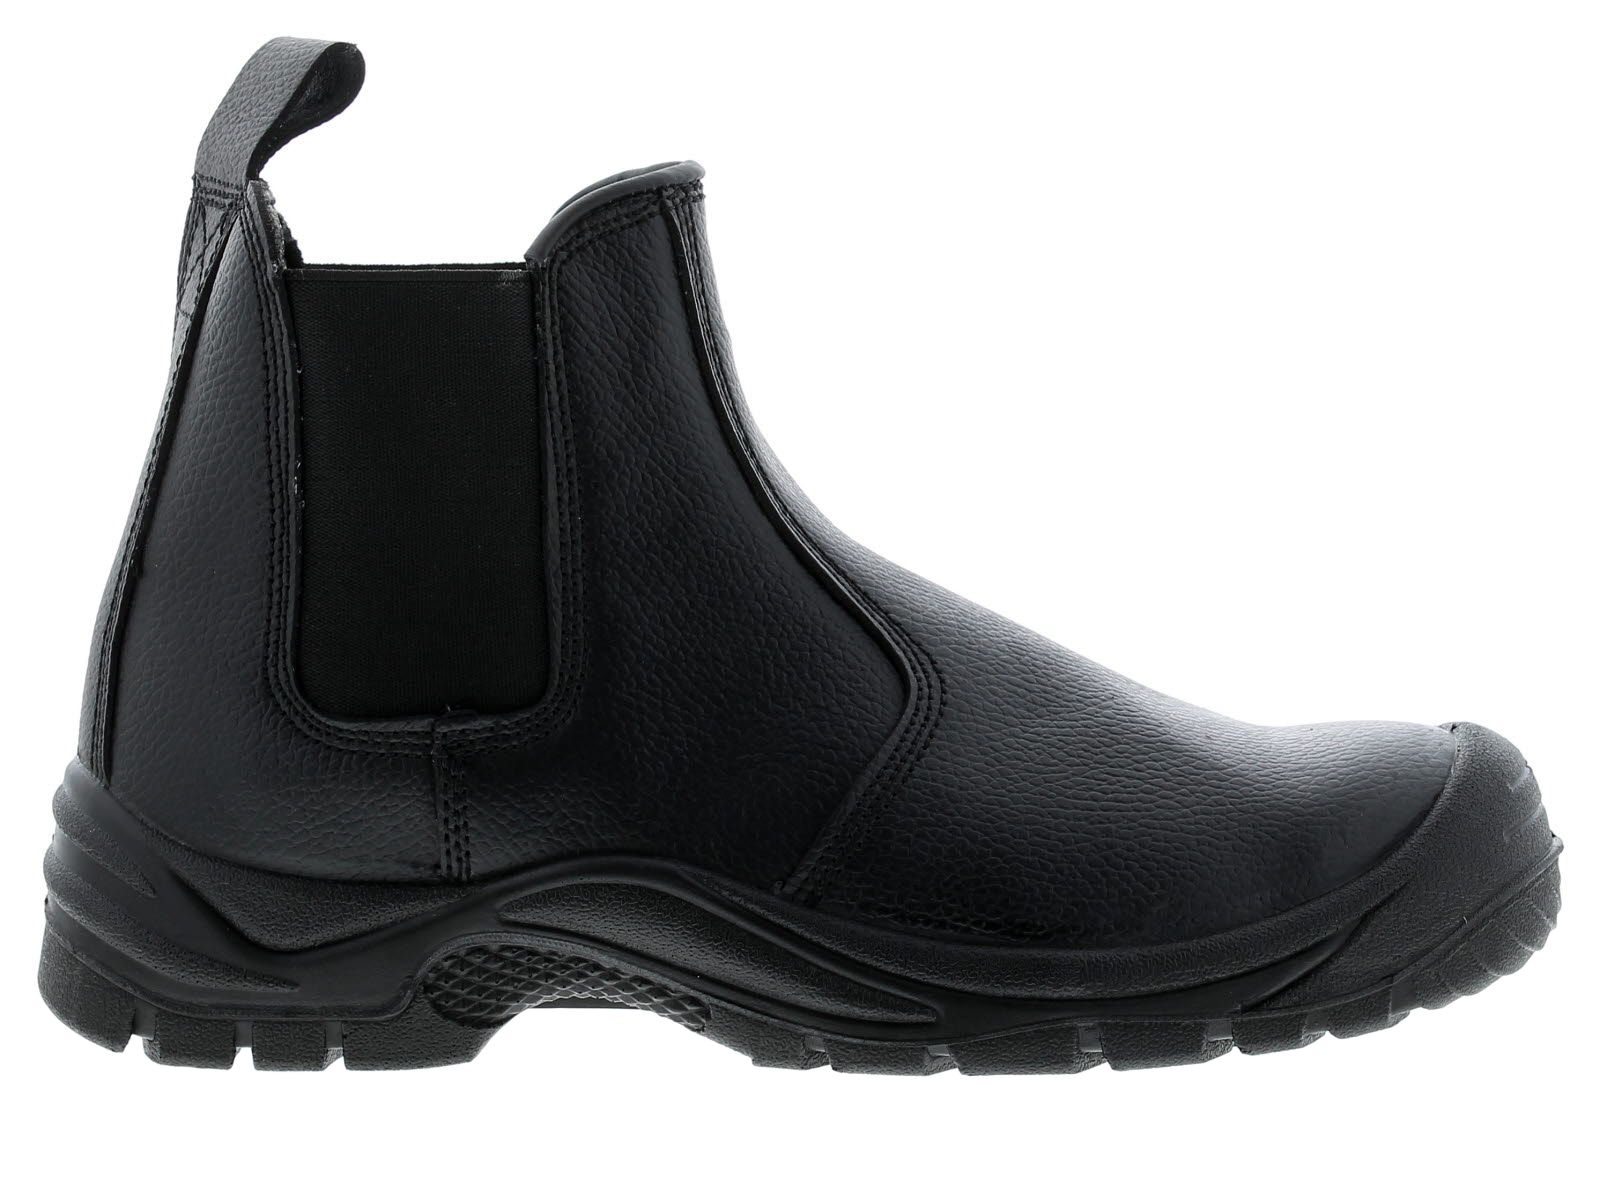 Tradesafe Gusset Mens Composite Toe Chelsea Style Safety Boots Black